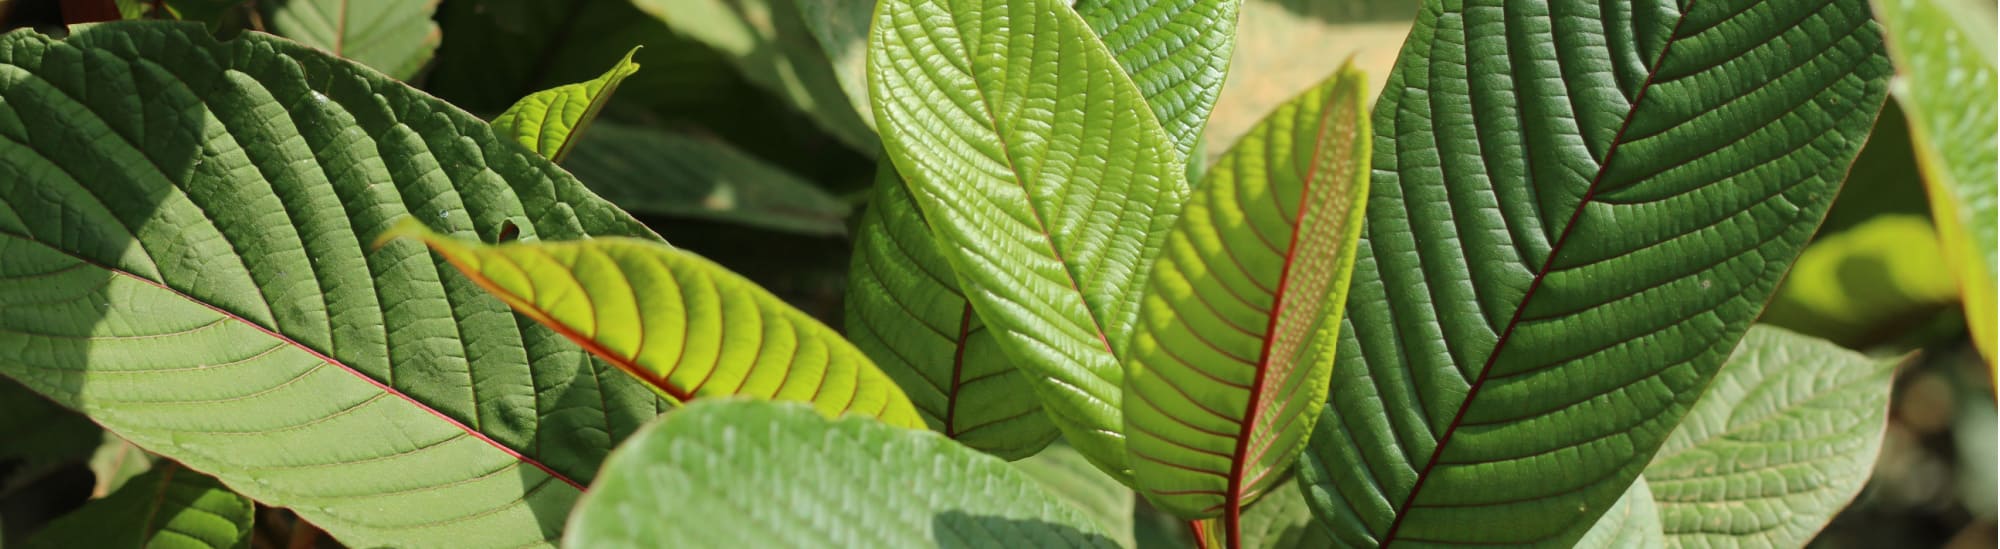 Red Sumatra Kratom Benefits, Effects, and Dosage